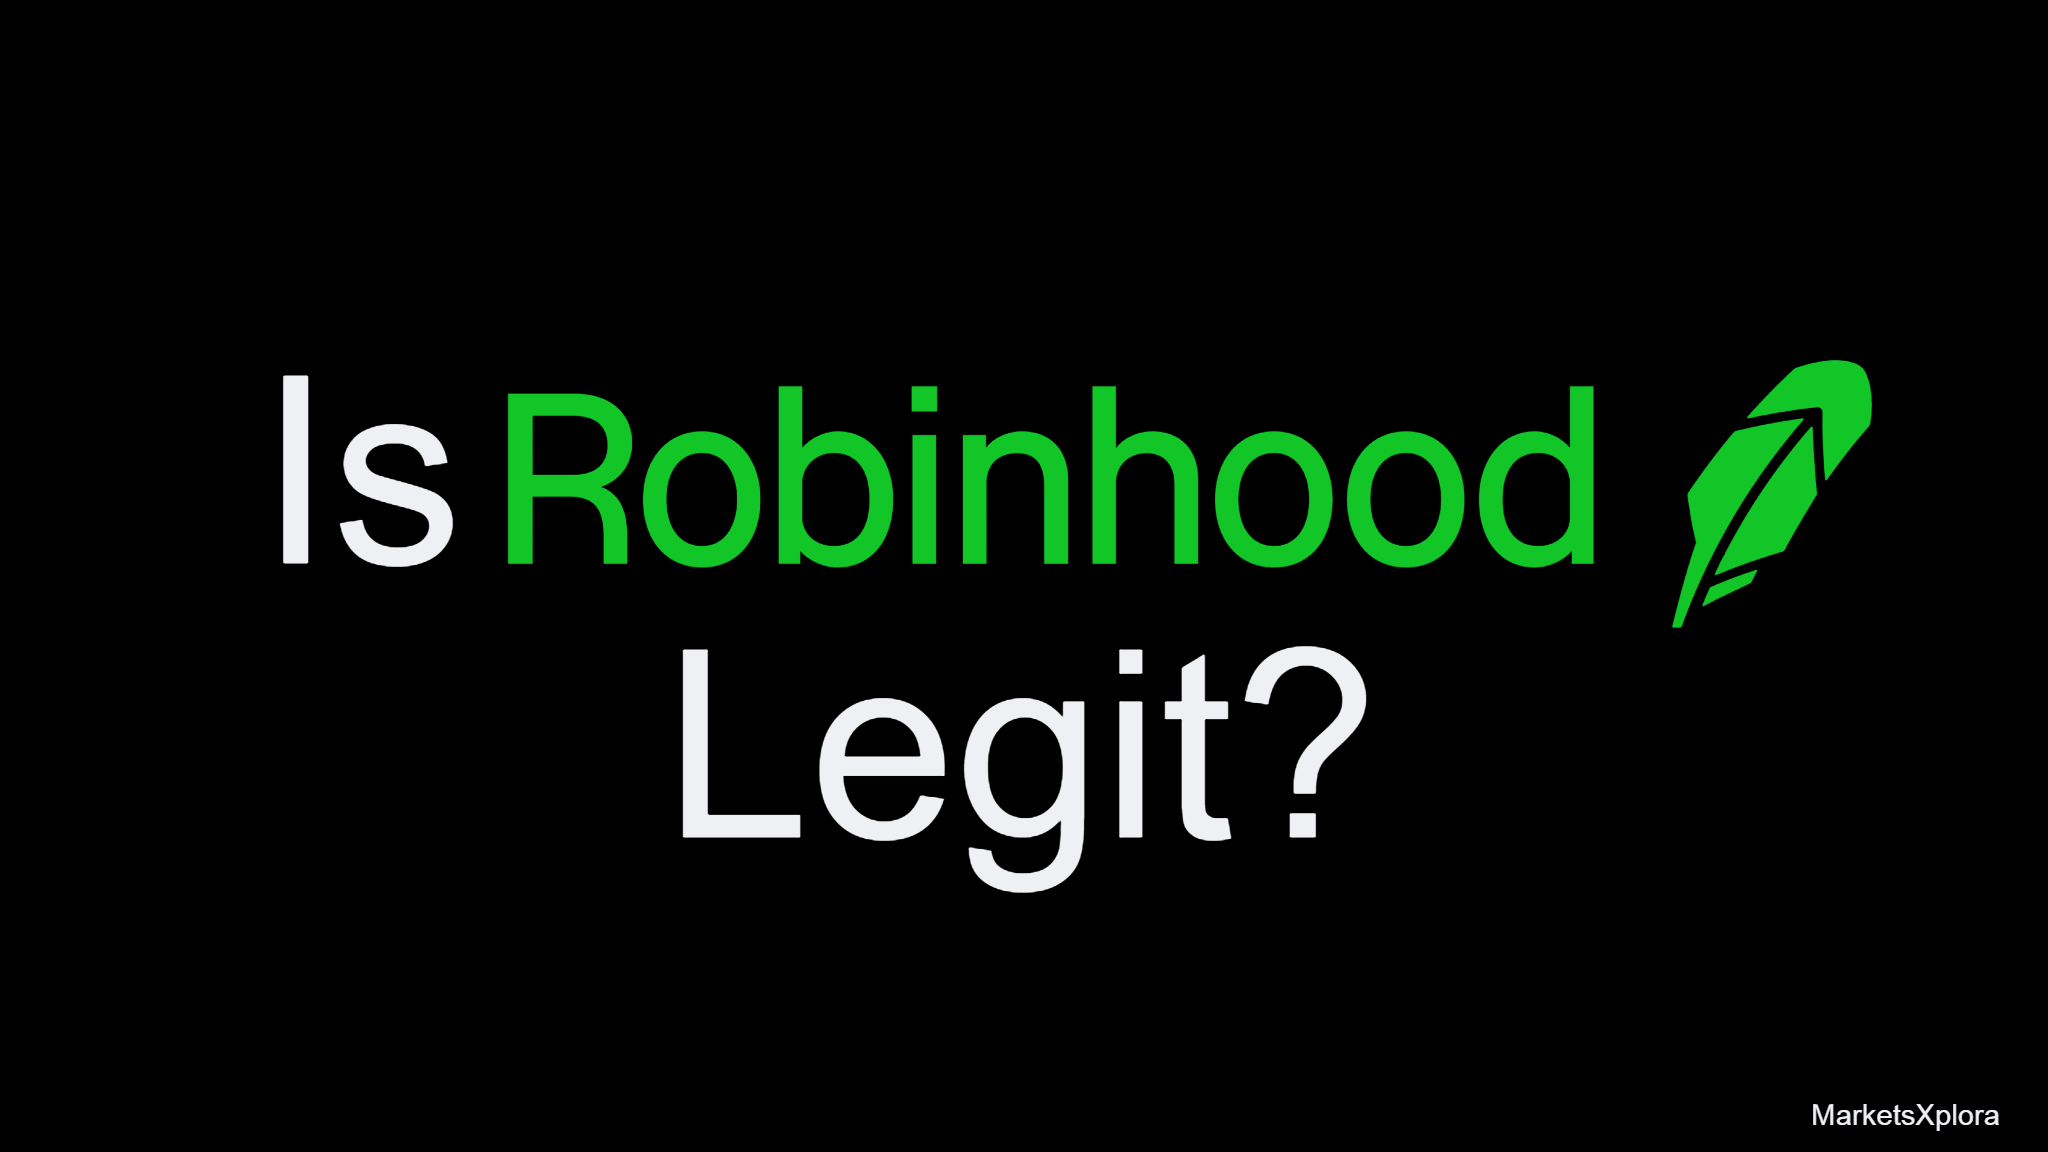 Is Robinhood legit or a scam? Get the facts on this trading app's regulatory licenses, banking partners, investment safeguards and more.